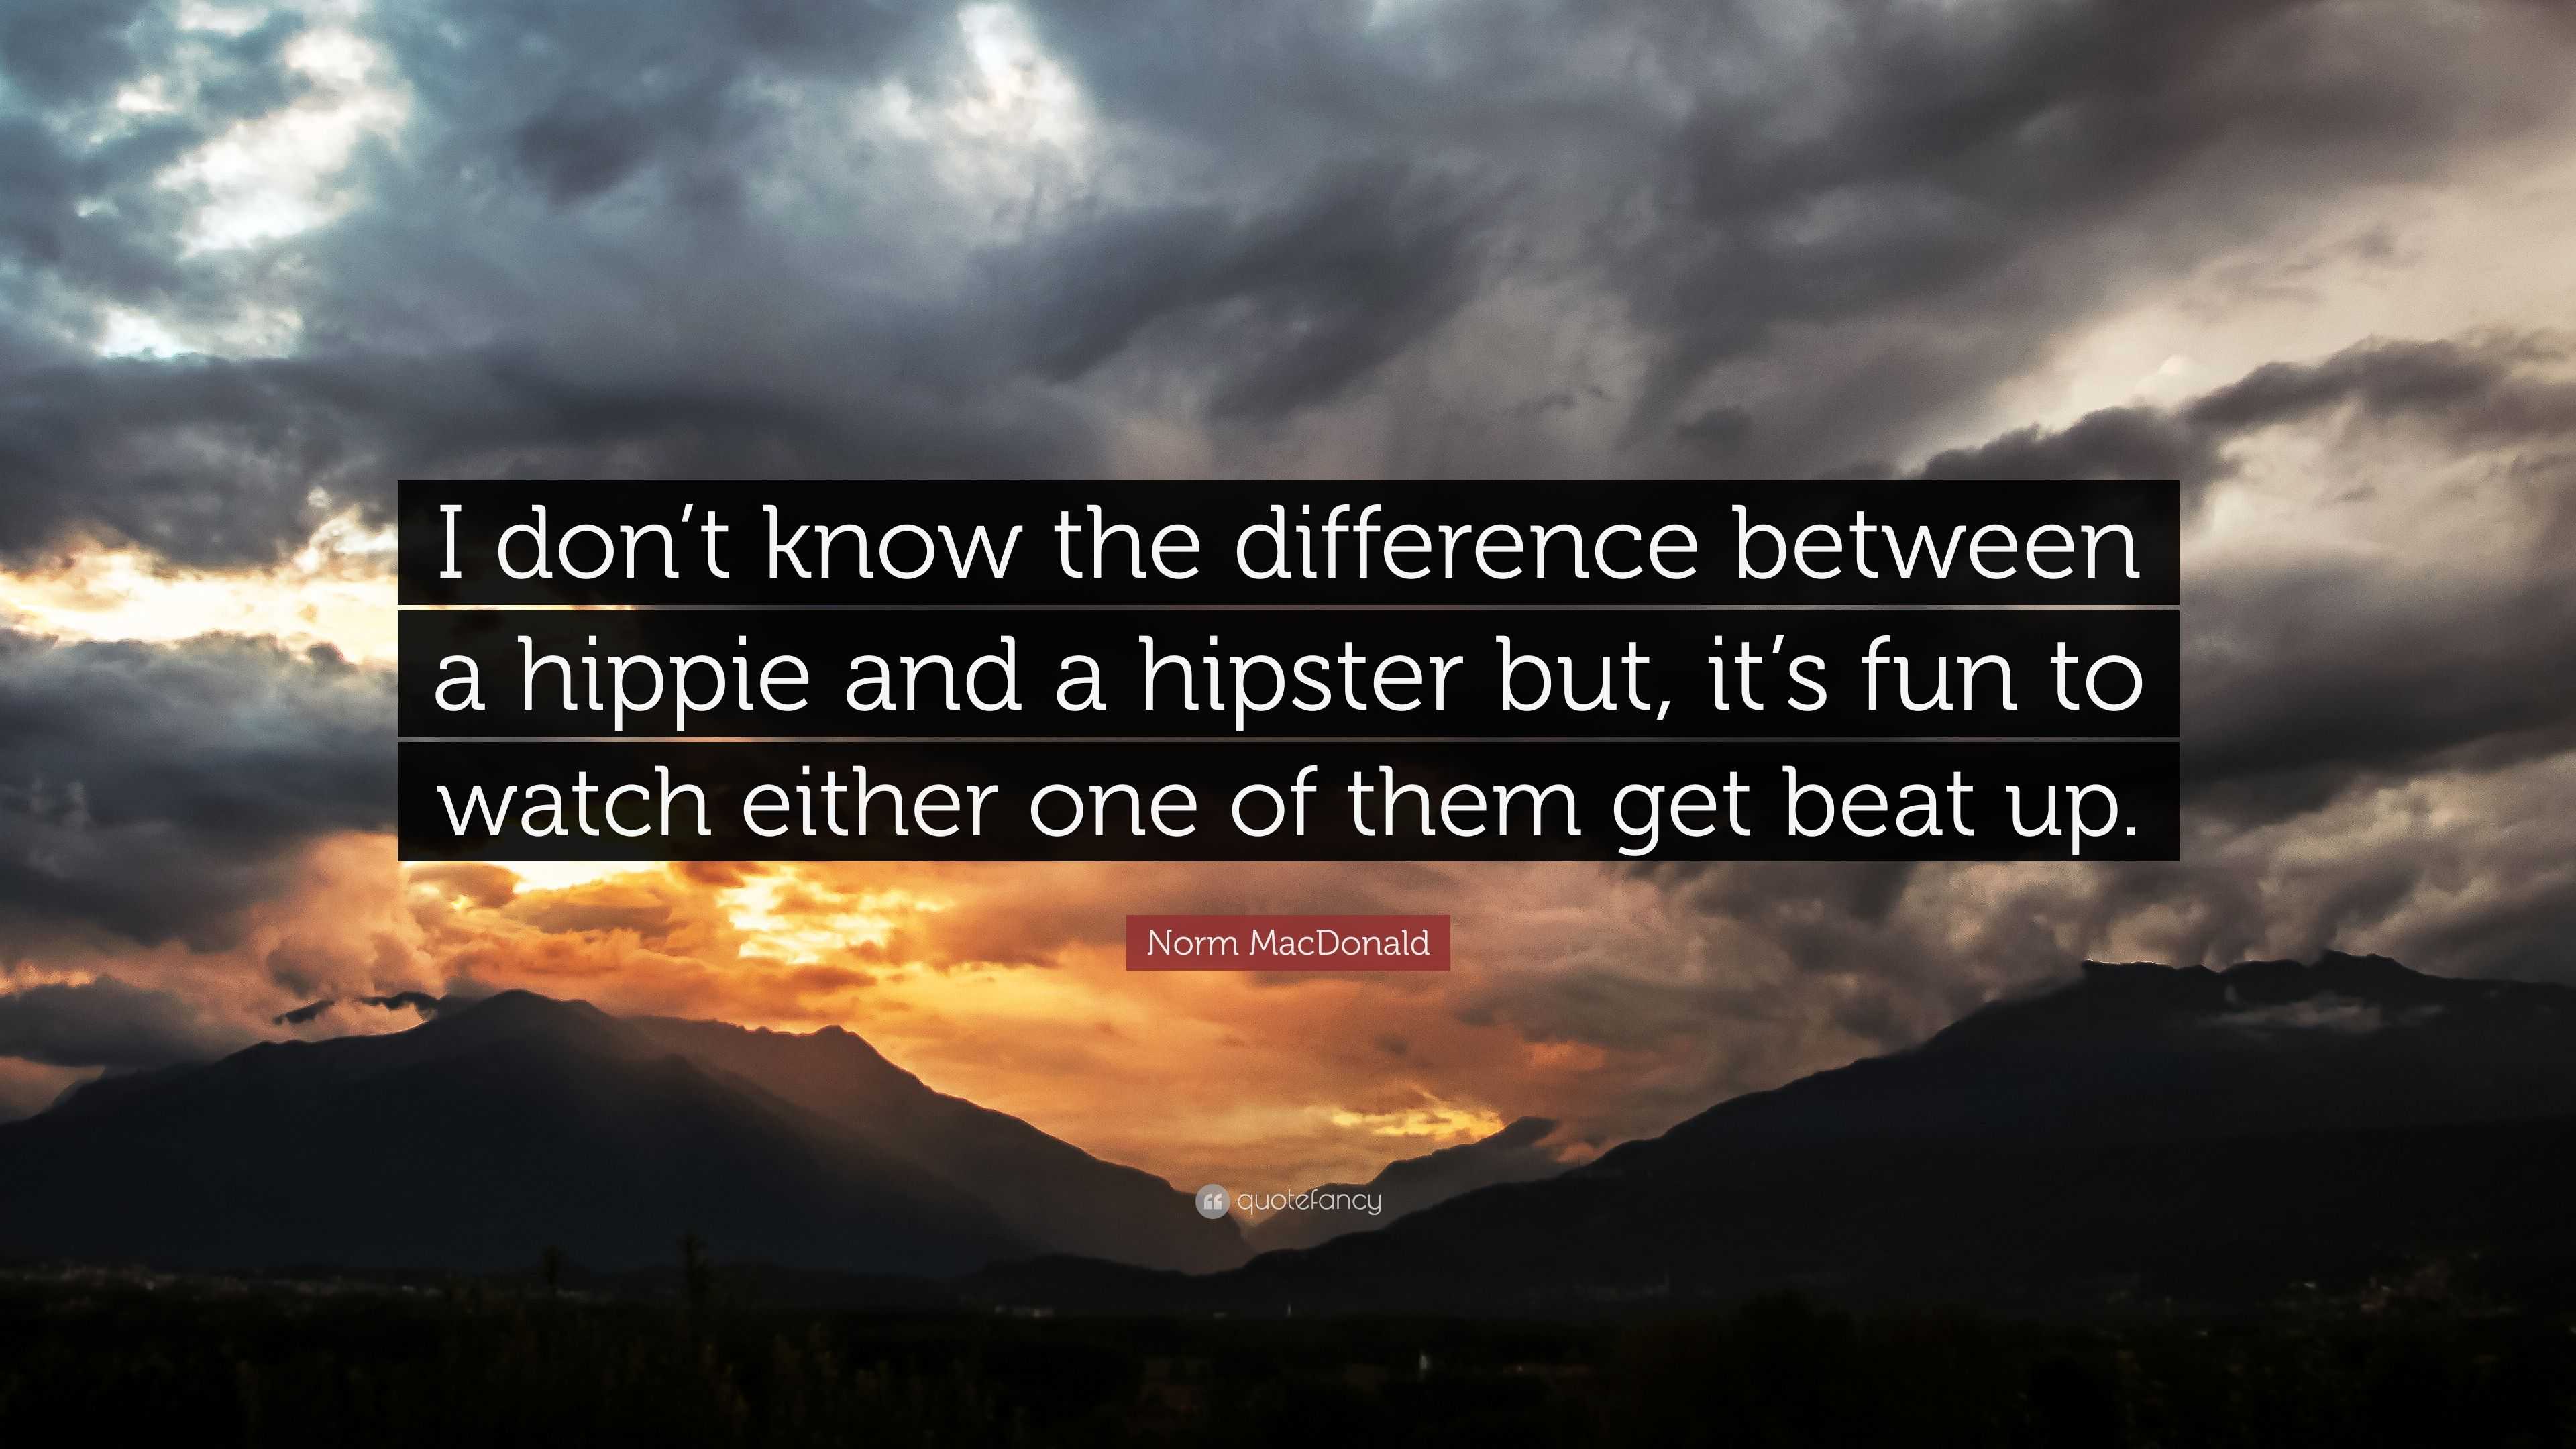 Norm MacDonald Quote: “I don't know the difference between a hippie and a  hipster but